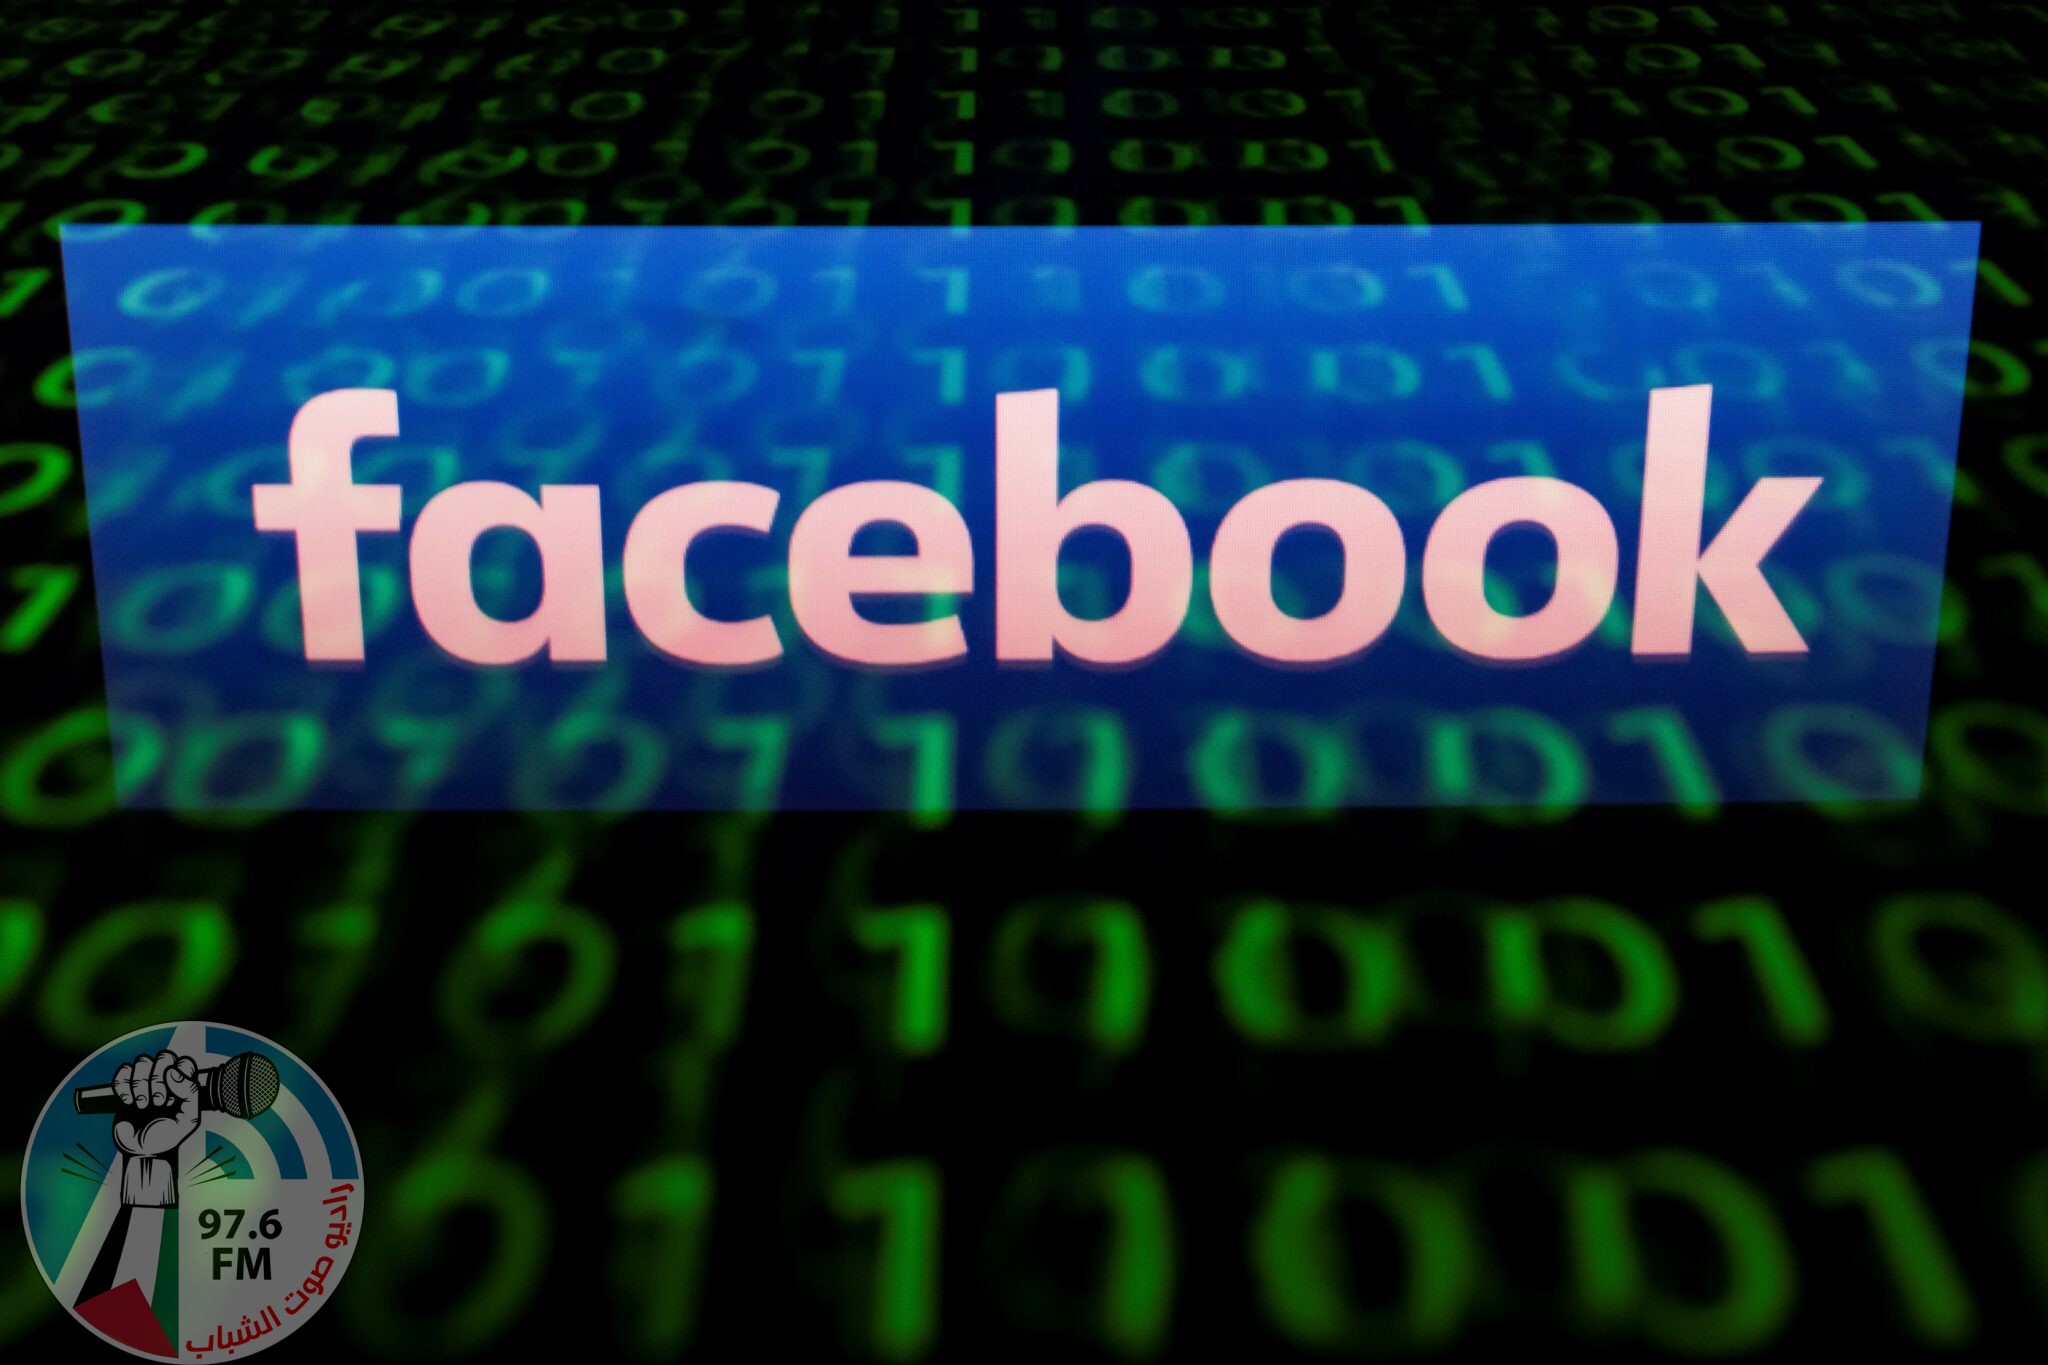 (FILES) This file illustration picture taken on April 28, 2018 shows the logo of social network Facebook displayed on a screen and reflected on a tablet in Paris. Facebook has asked major US banks to share customer data to allow it to develop new services on the social network's Messenger texting platform, a banking source told AFP on August 6, 2018. / AFP / Lionel BONAVENTURE